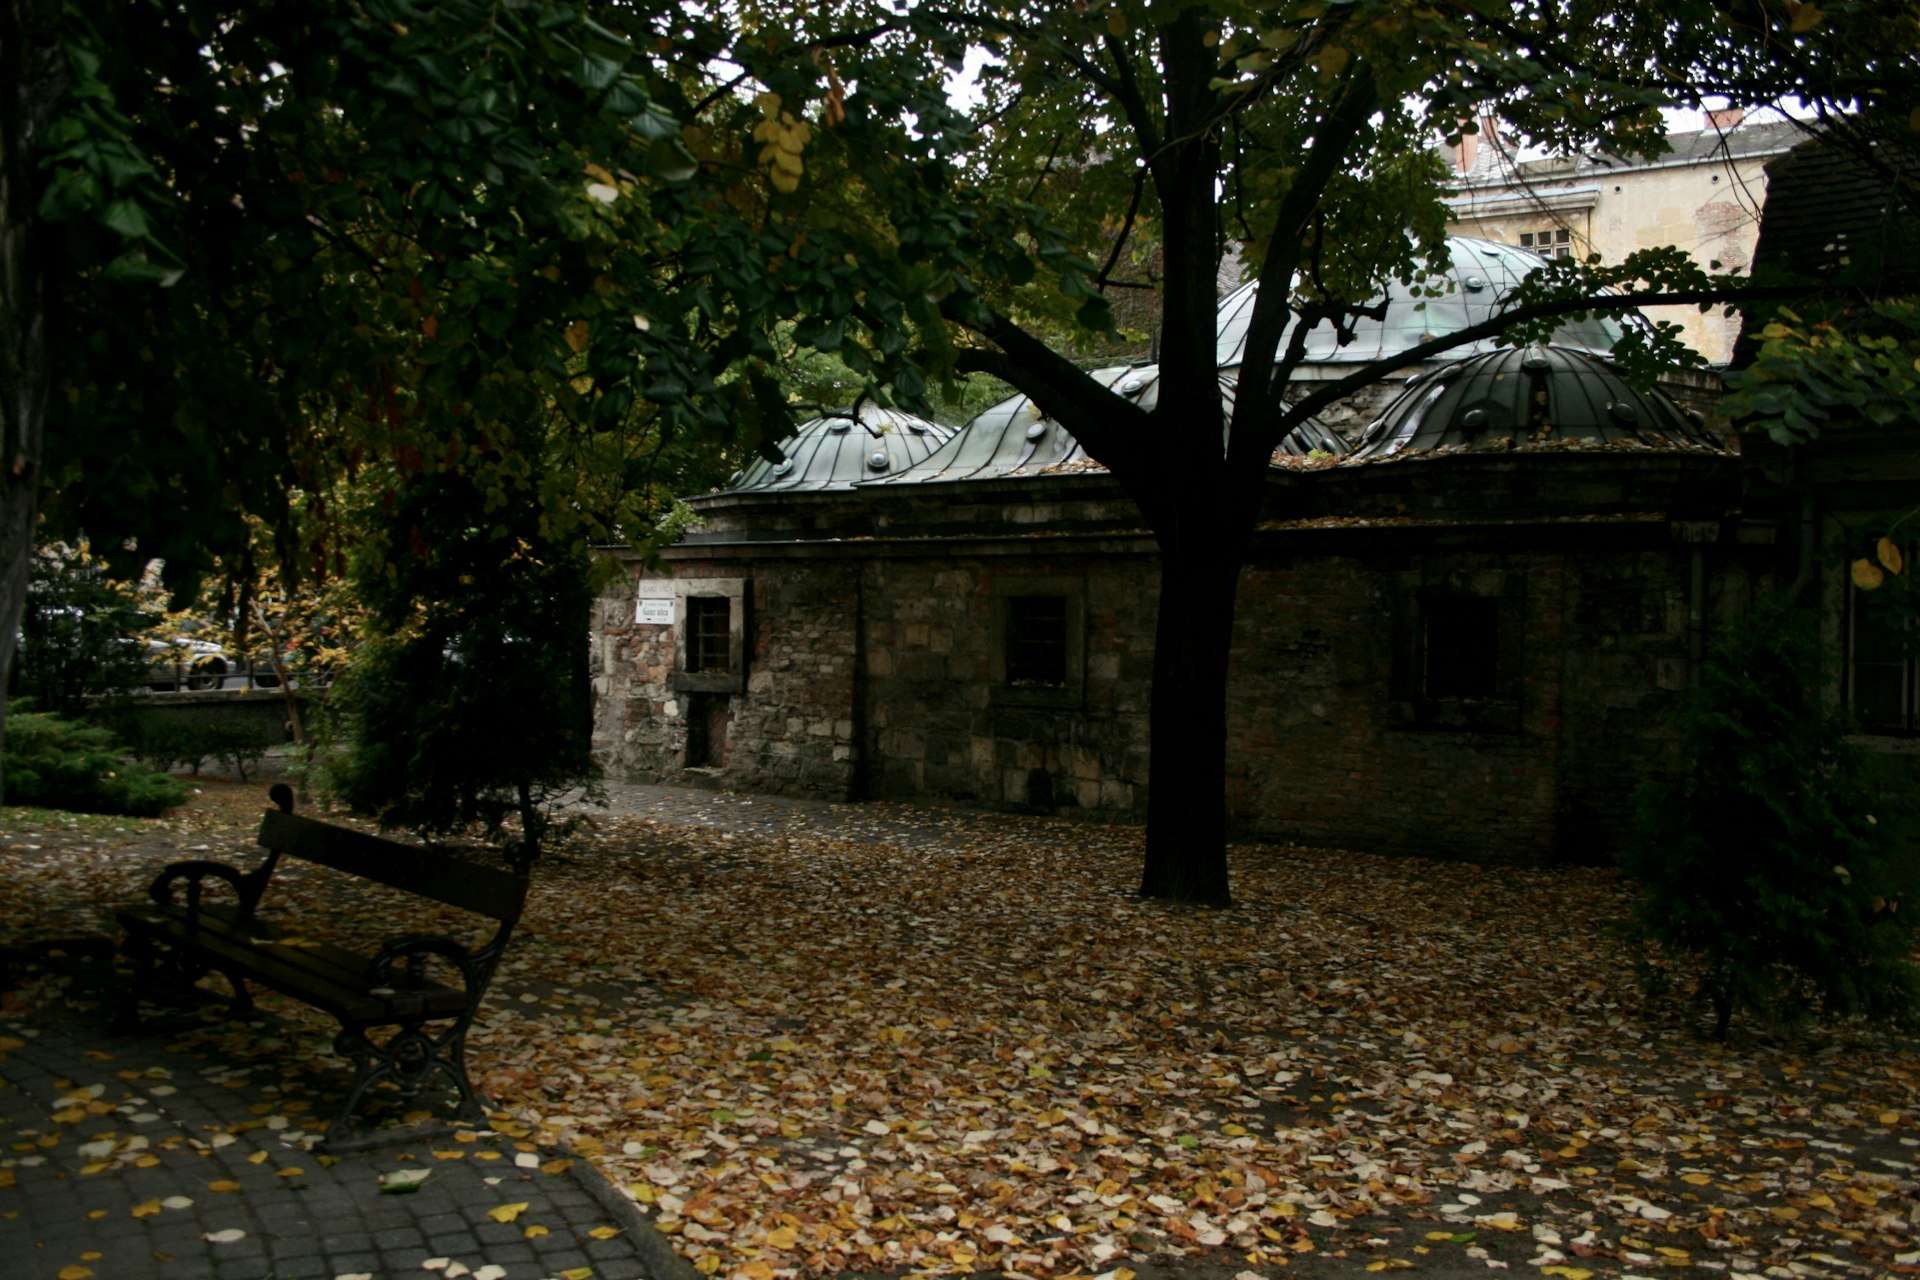 Hidden beneath the shadow of an overhanging tree, where autumnal leaves litter the ground and a bench sits empty are multi-brick walls and the domed roof of the Király Baths, the oldest Turkish baths in Budapest